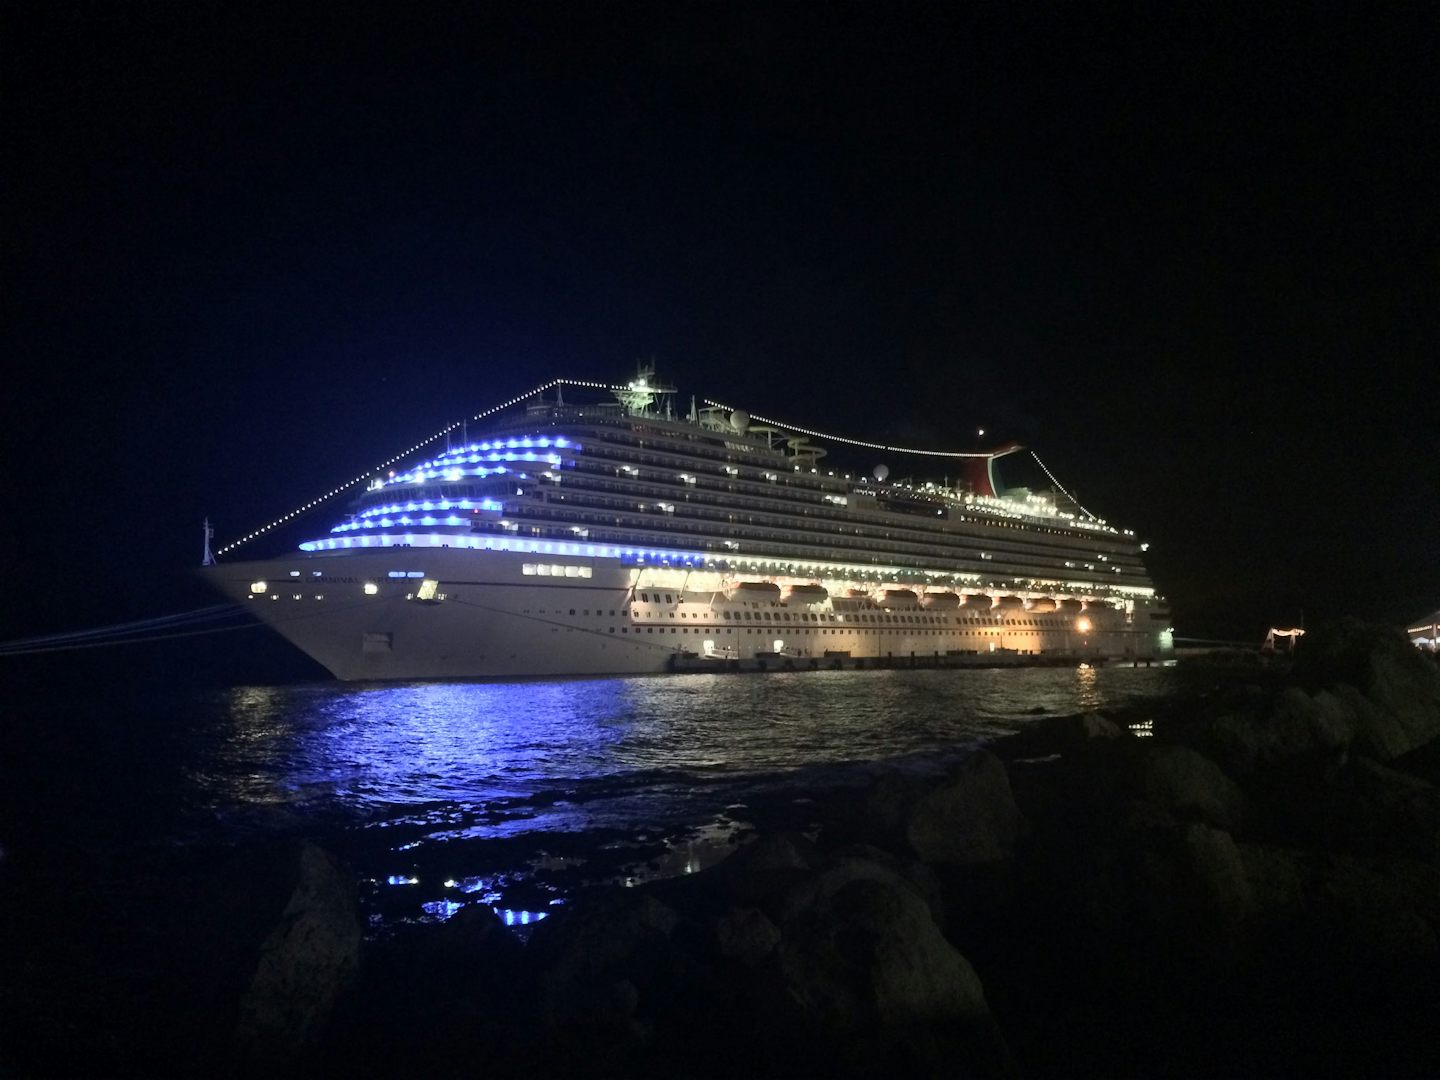 Nighttie view of the ship docked in Curacao